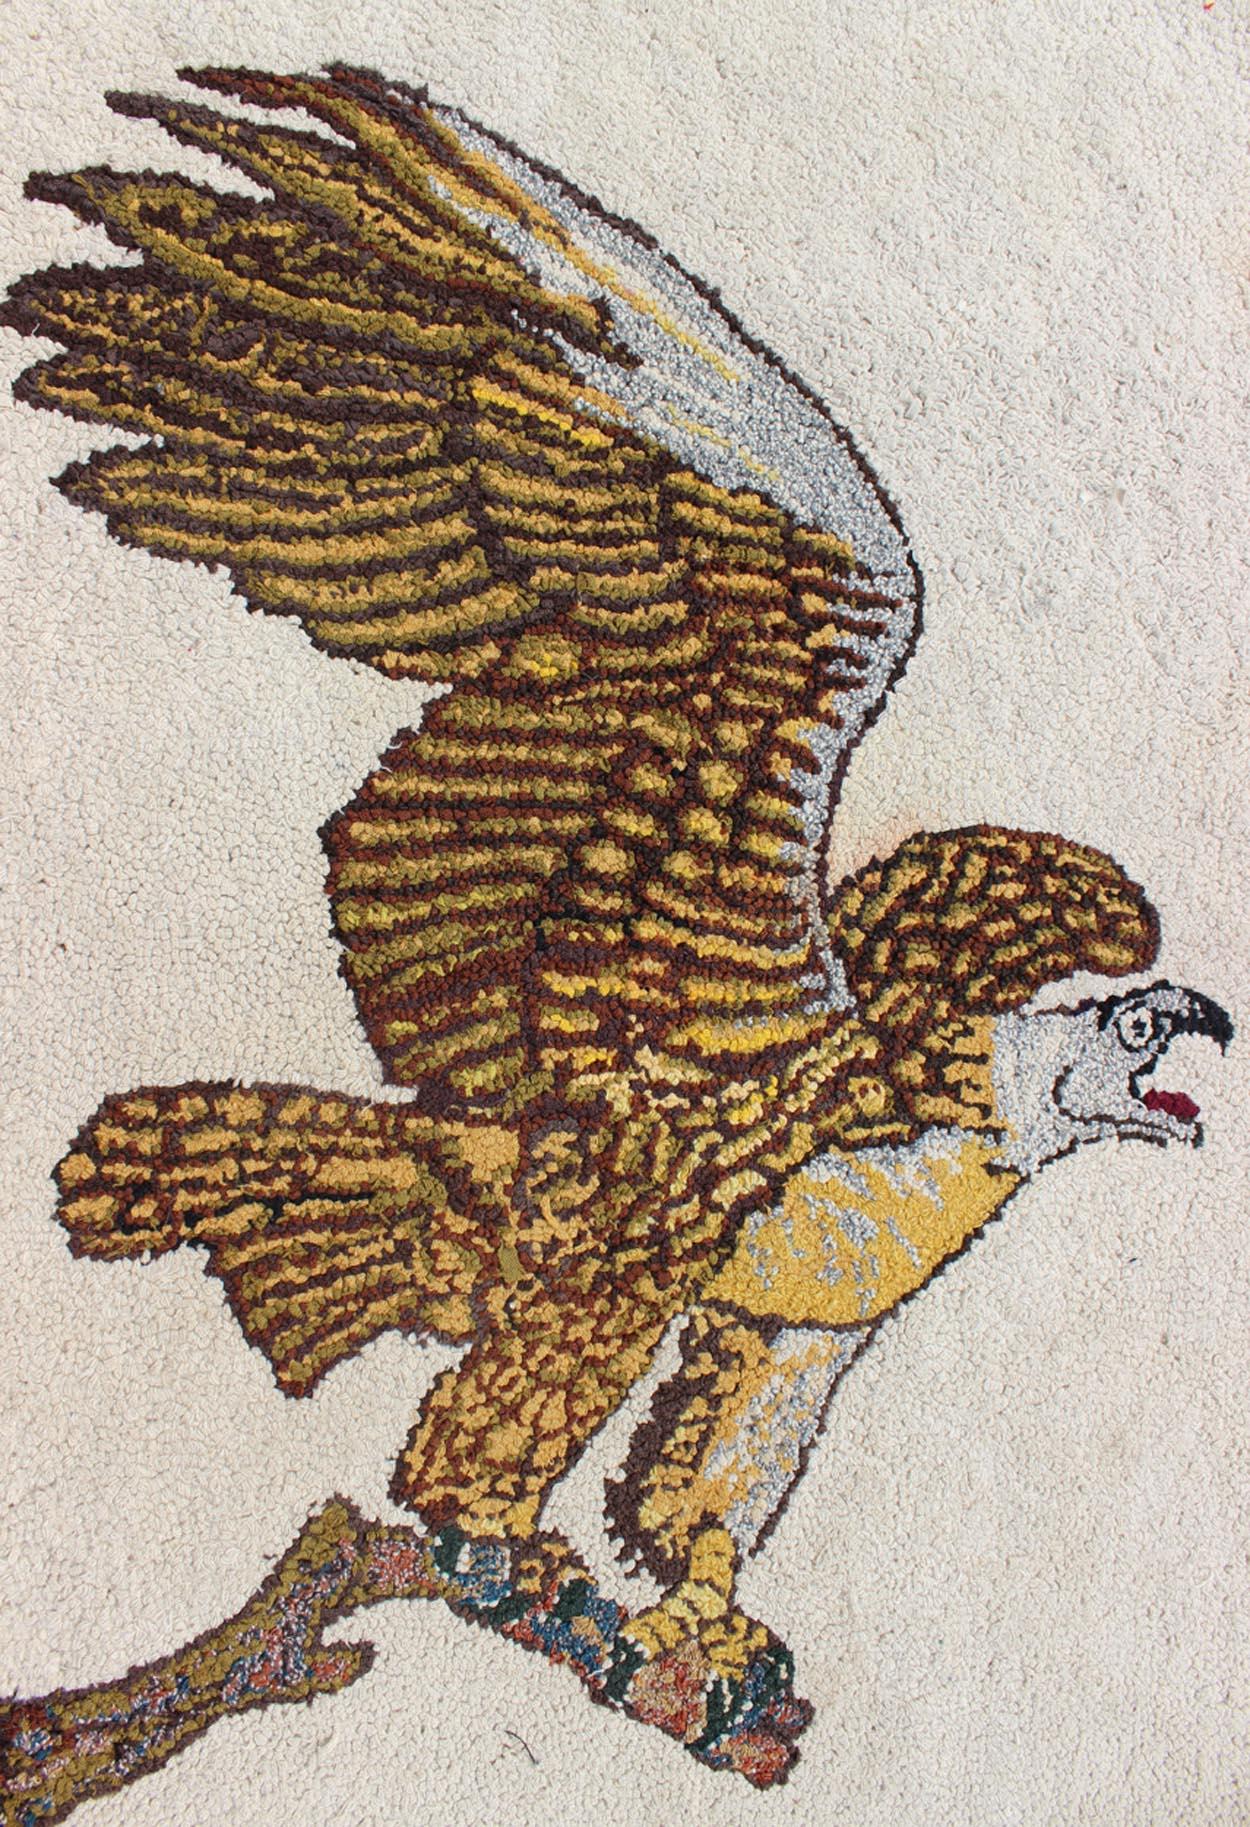 20th Century Pictorial Antique American Hooked Rug Of A American Bald Eagle Hooked Rug For Sale